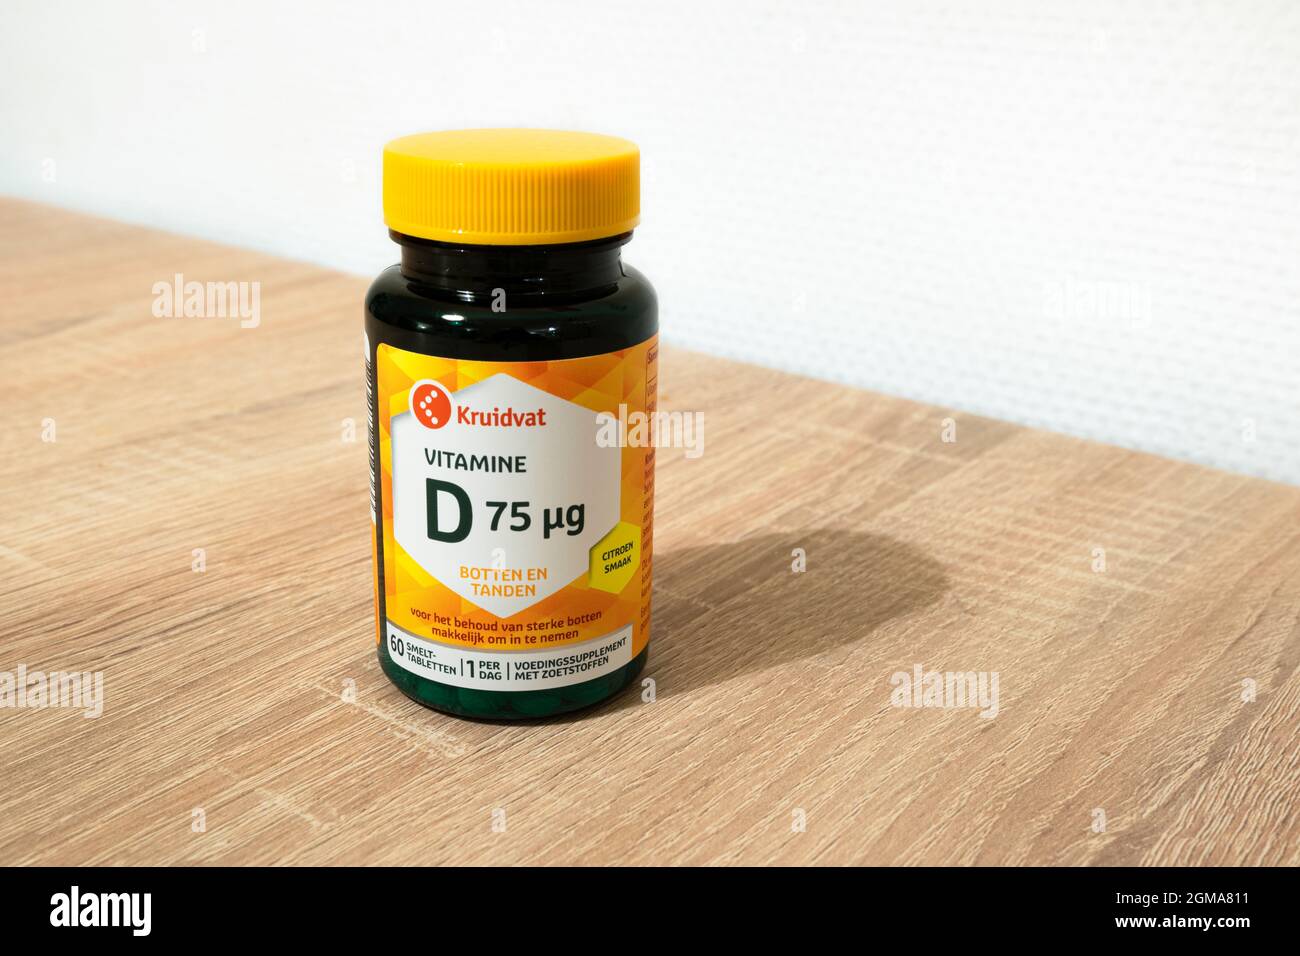 Bottle of vitamine D capsules from the brand Kruidvat on a table Stock Photo